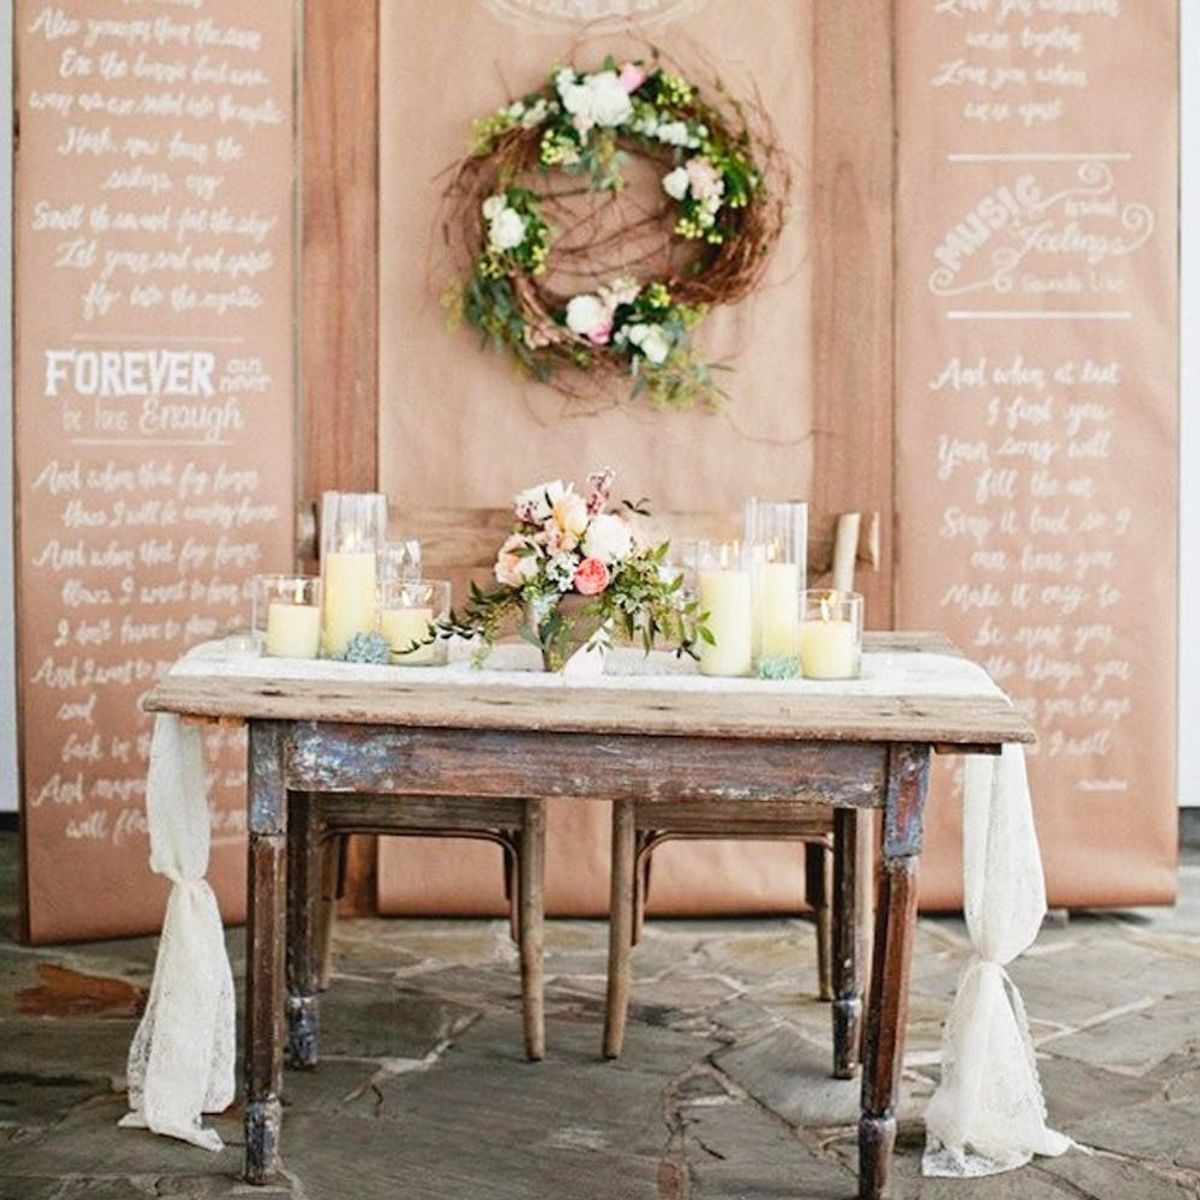 10 Adorable Sweetheart Tables for Your Spring Wedding